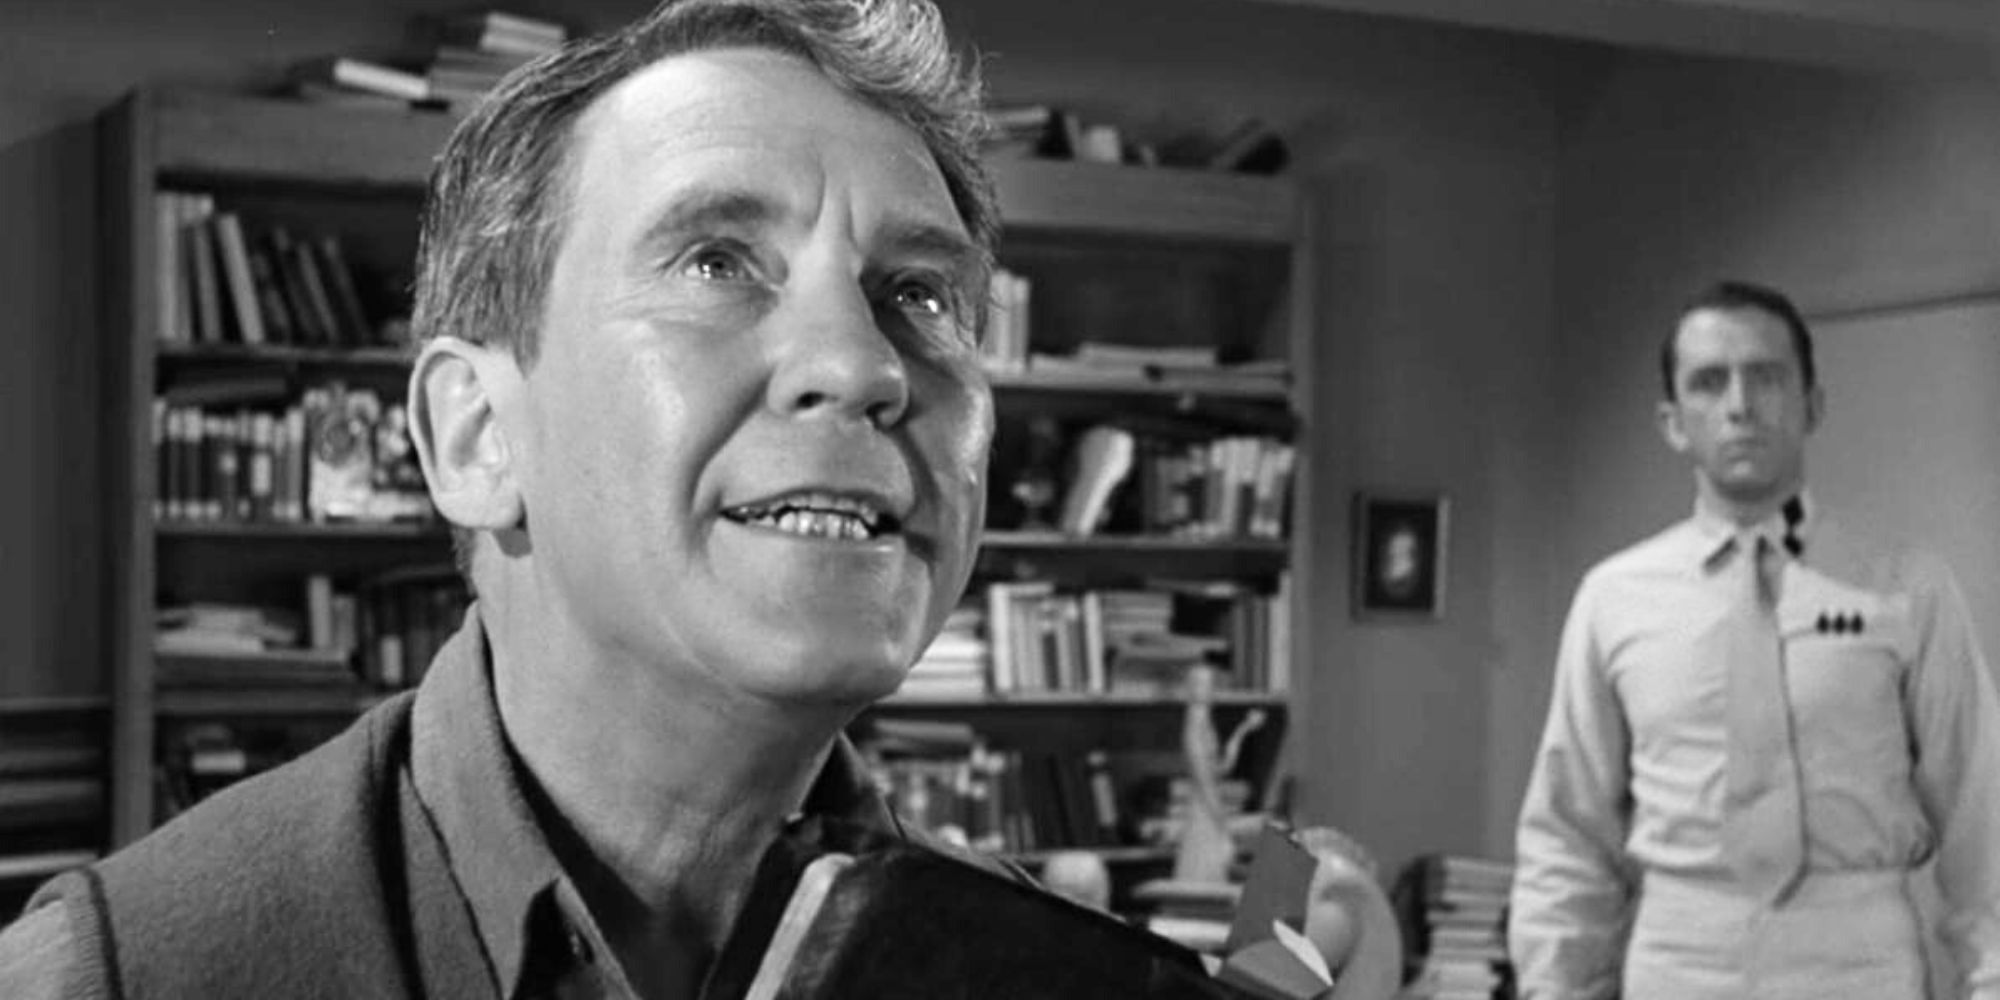 Burgess Meredith speaking while Fritz Weaver stands in the background in The Twilight Zone